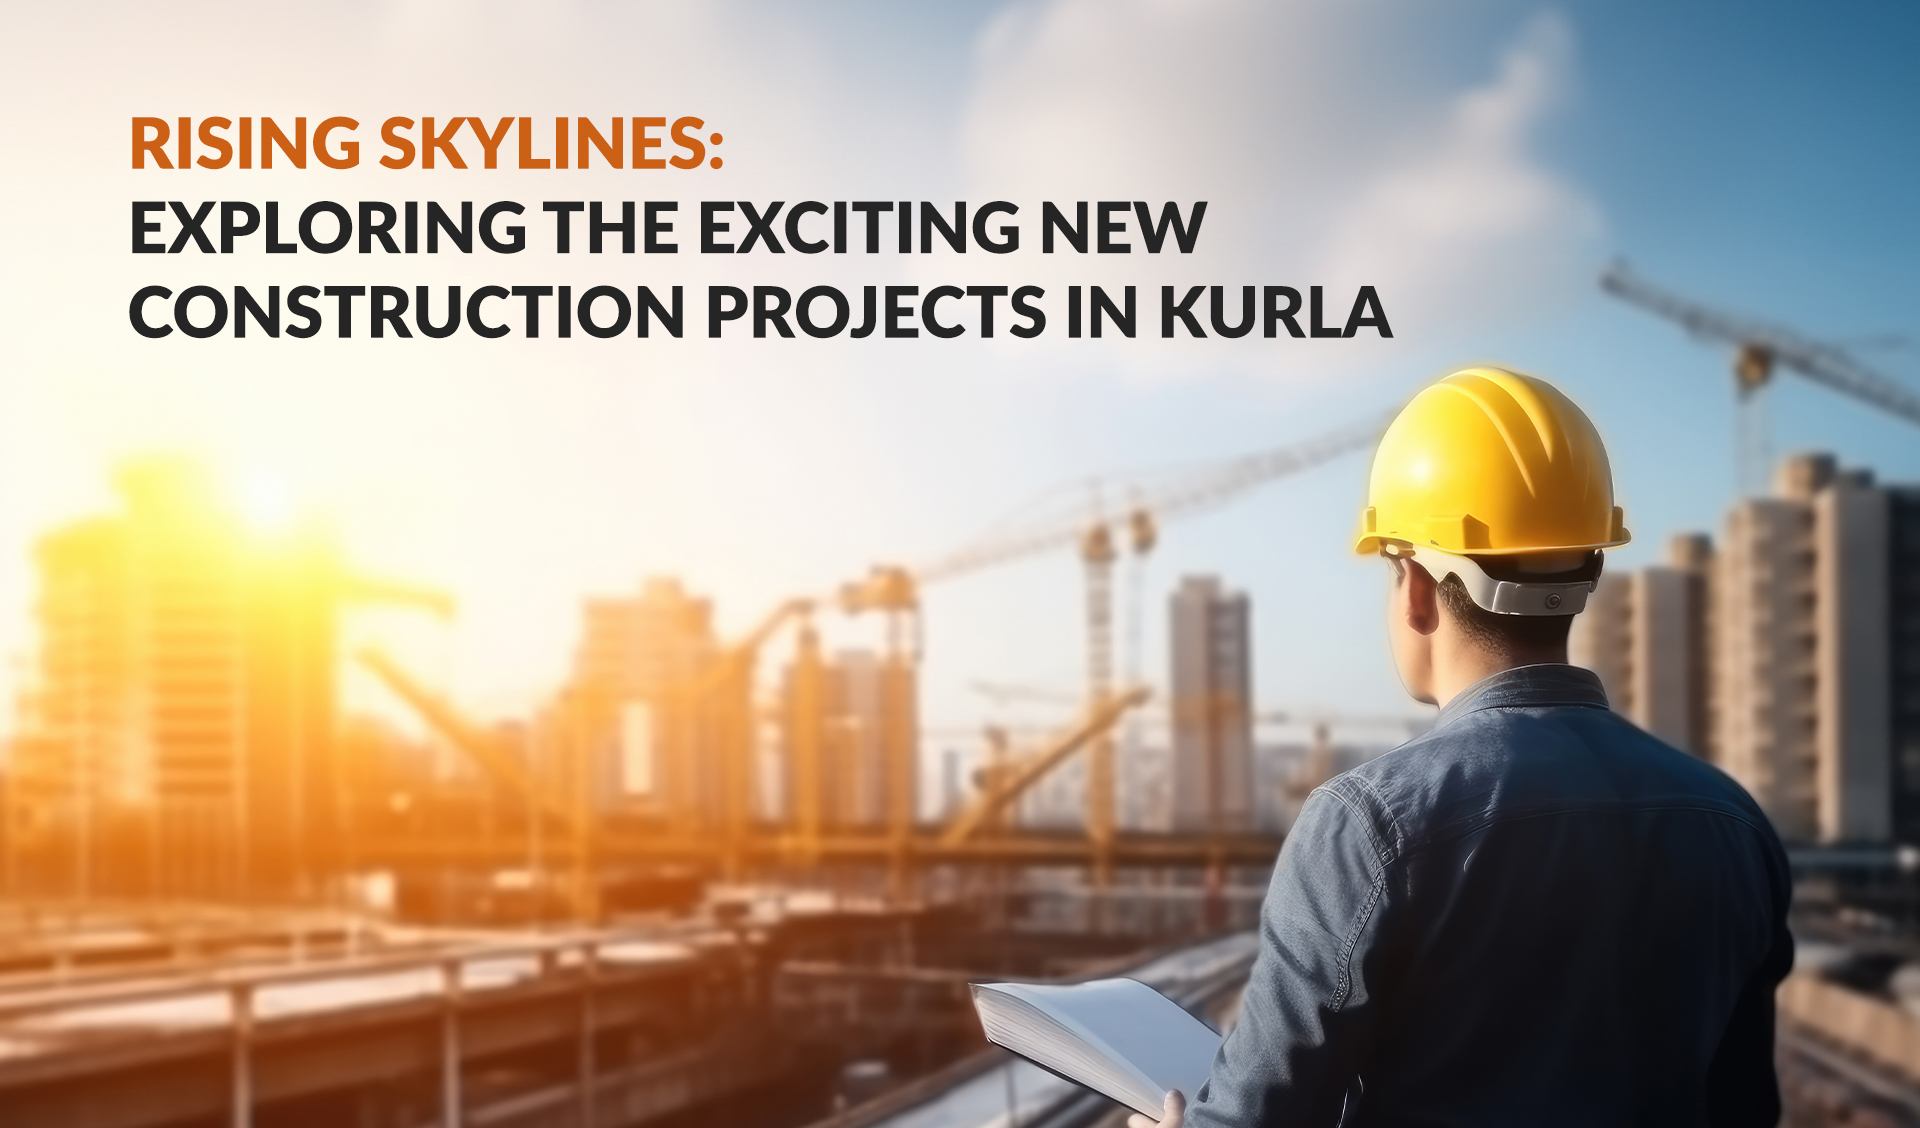 Rising Skylines: Exploring the Exciting New Construction Projects in Kurla